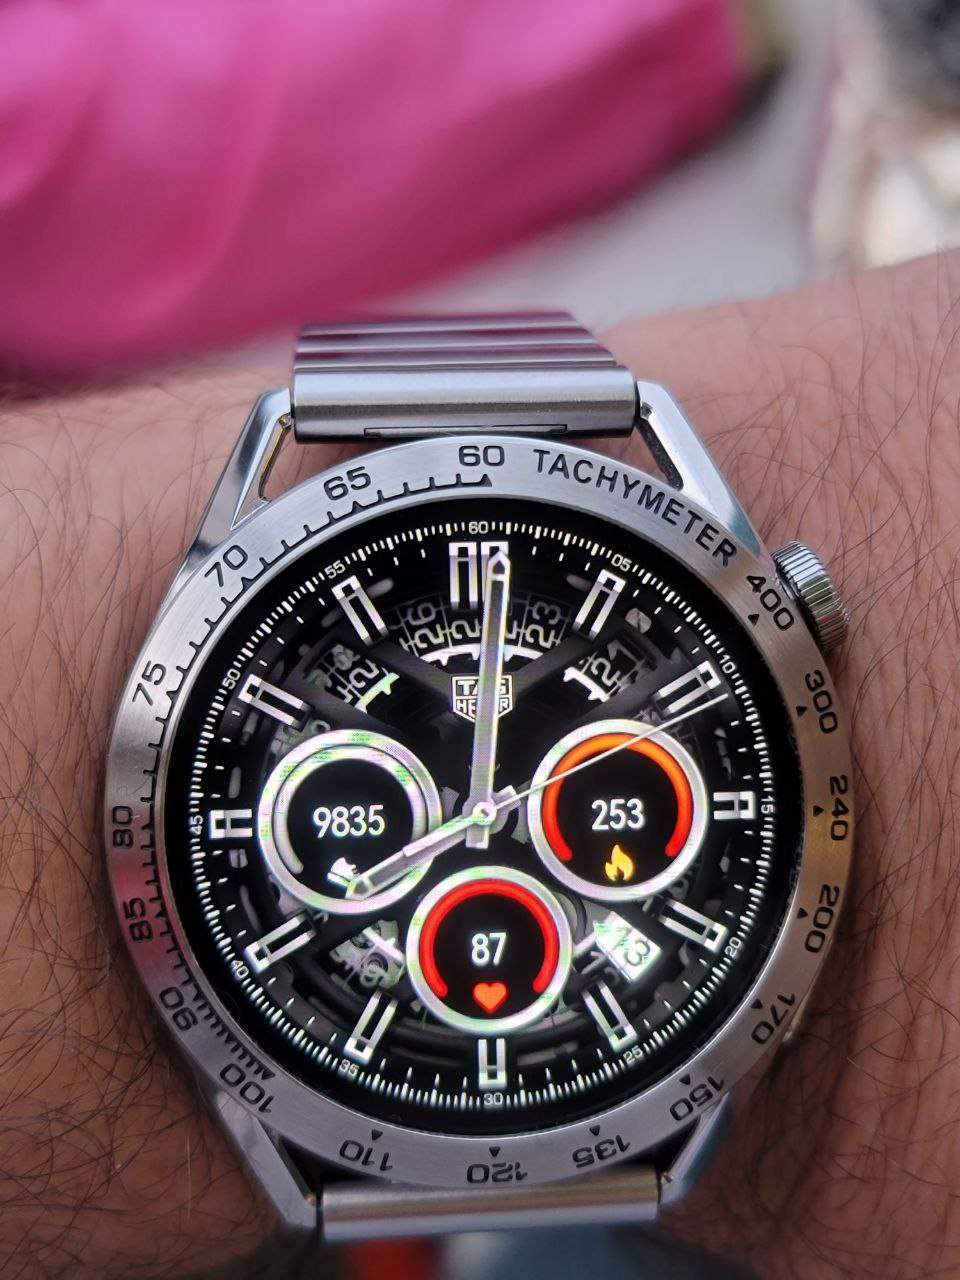 Carrera tag heuer HQ ported watch face theme